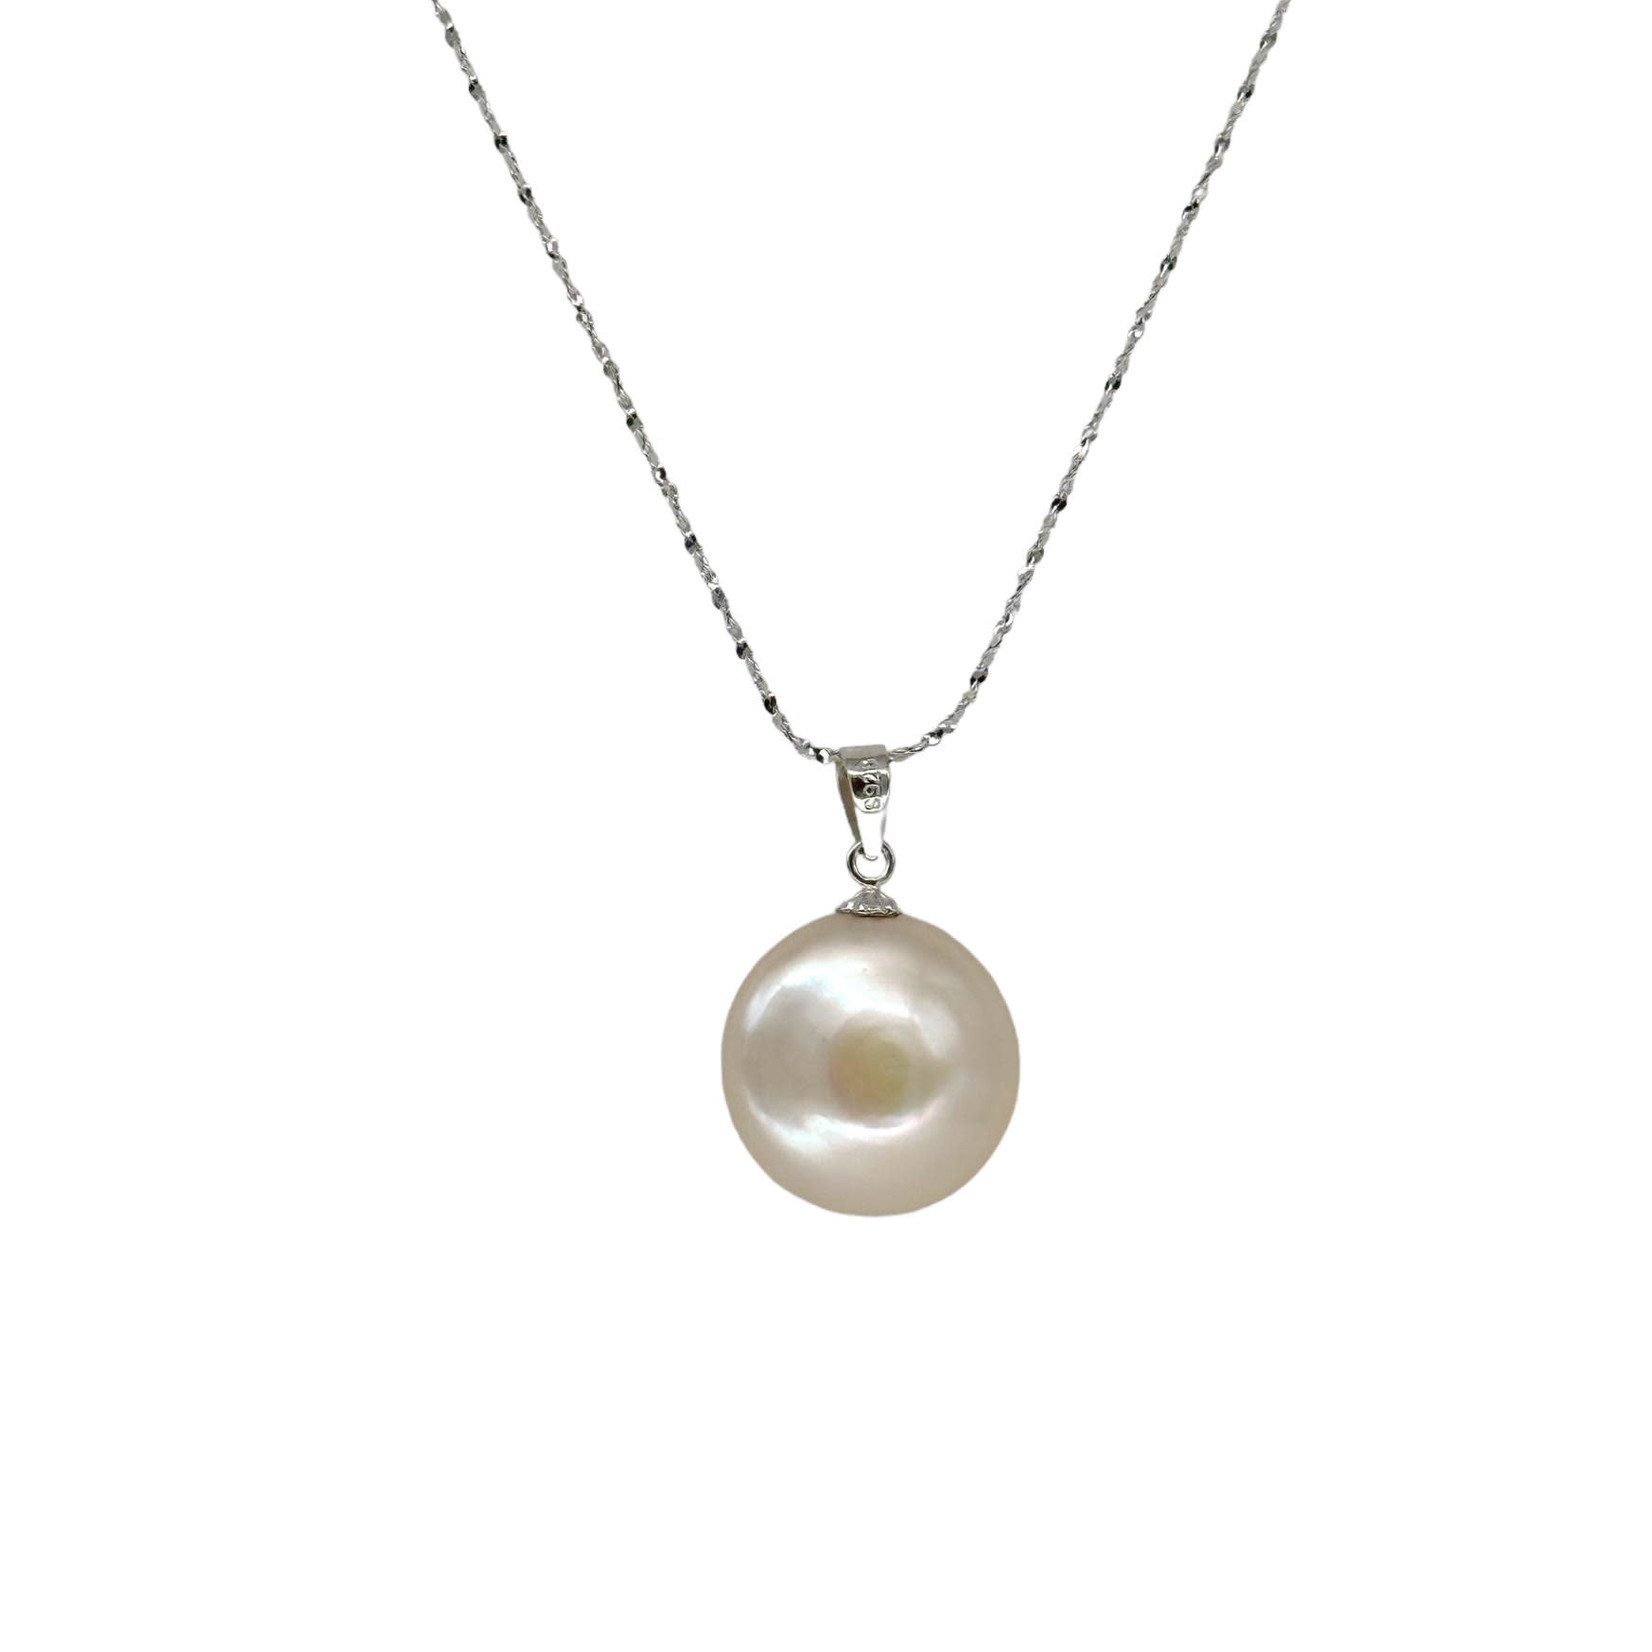 14-17mm Coin Pearl Pendant with Sterling Silver Chain Peach